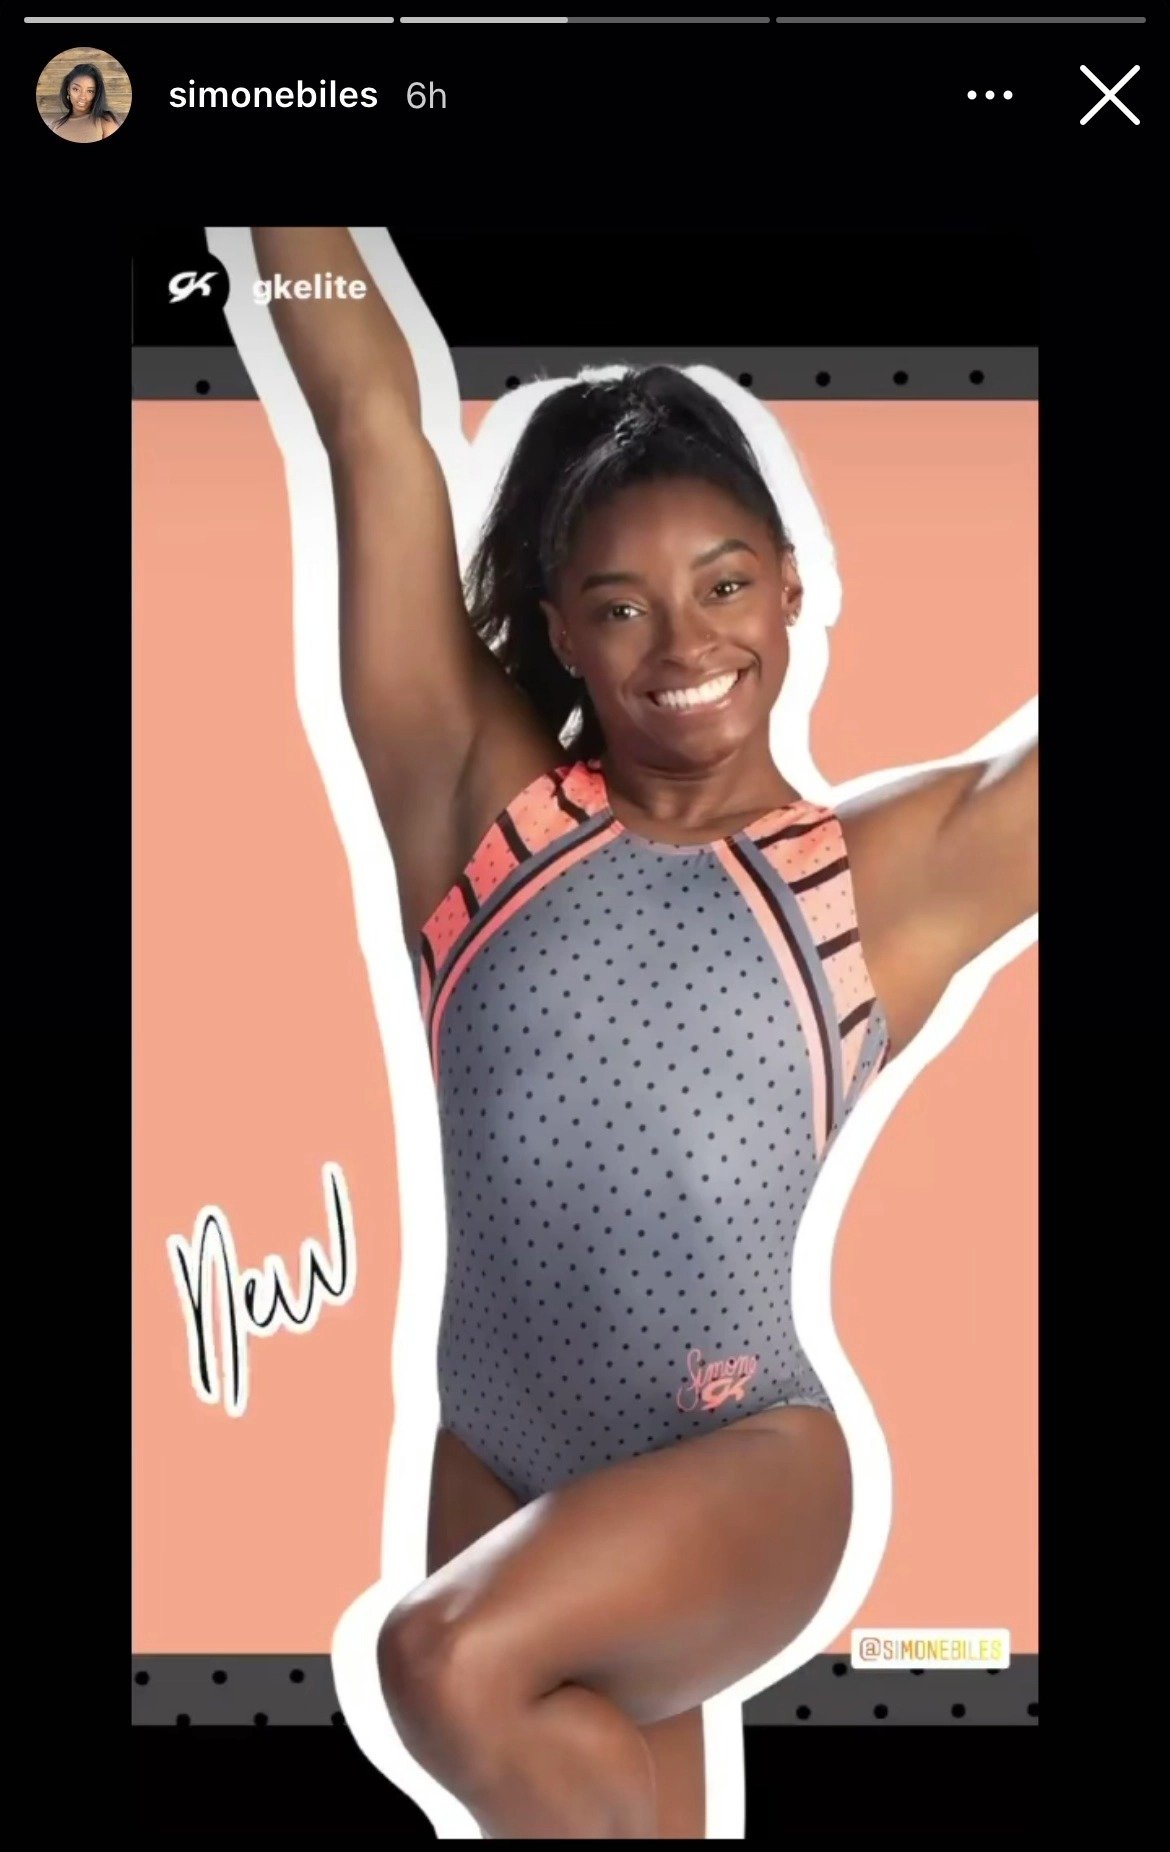 Simone Biles in another leotard outfit showing off her fit physique. | Photo: instagram.com/simonebiles